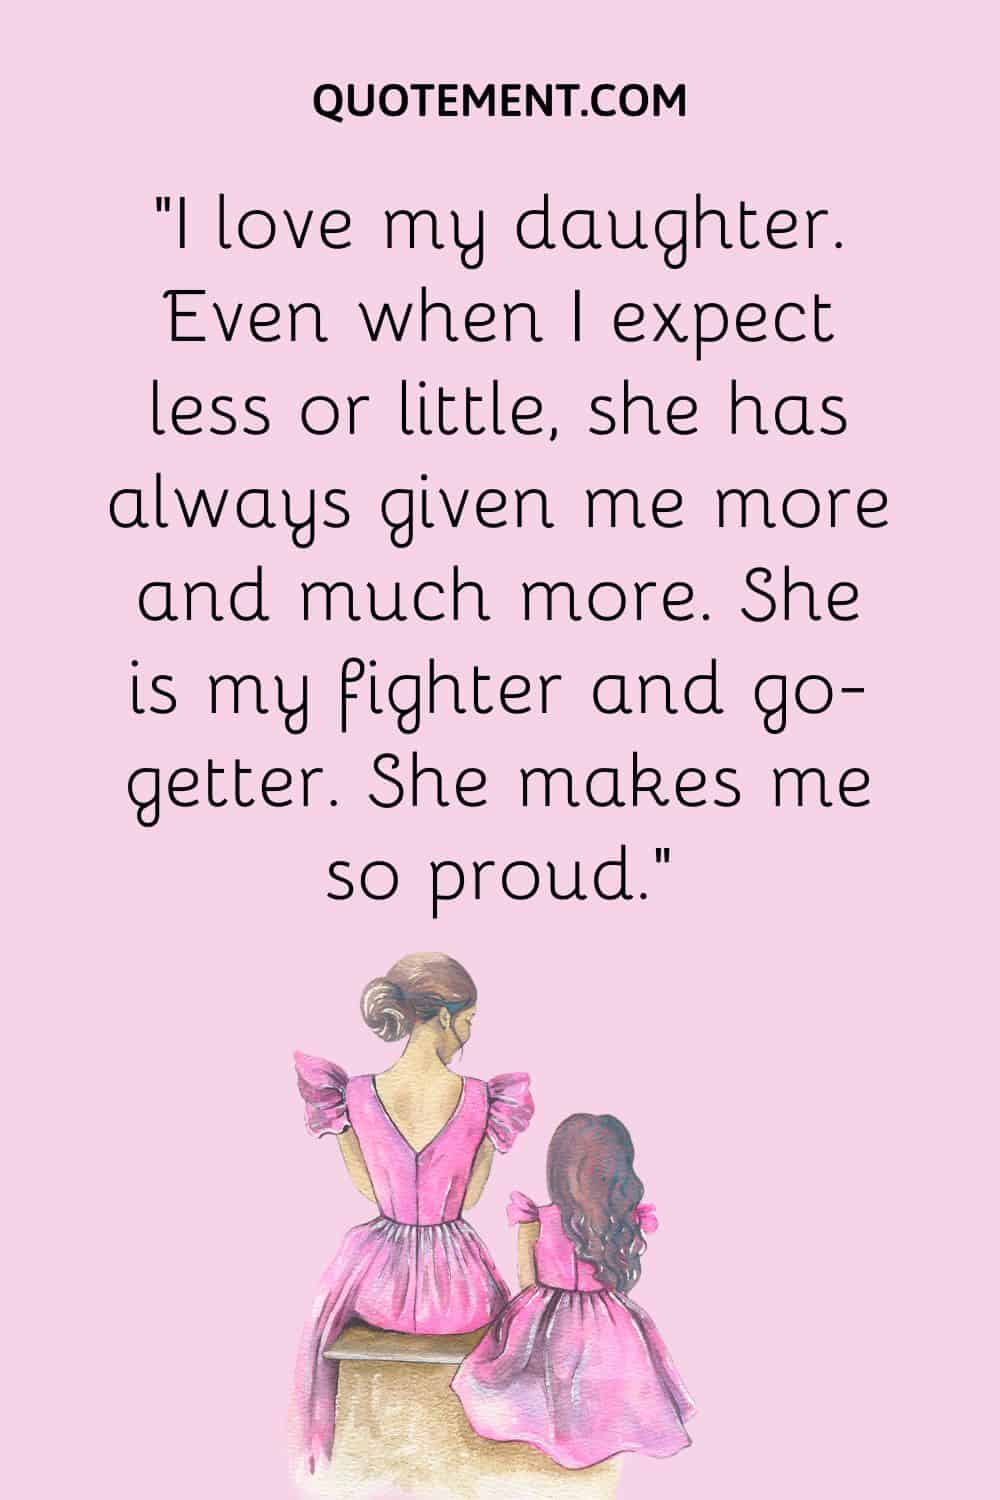 “I love my daughter. Even when I expect less or little, she has always given me more and much more. She is my fighter and go-getter. She makes me so proud.”